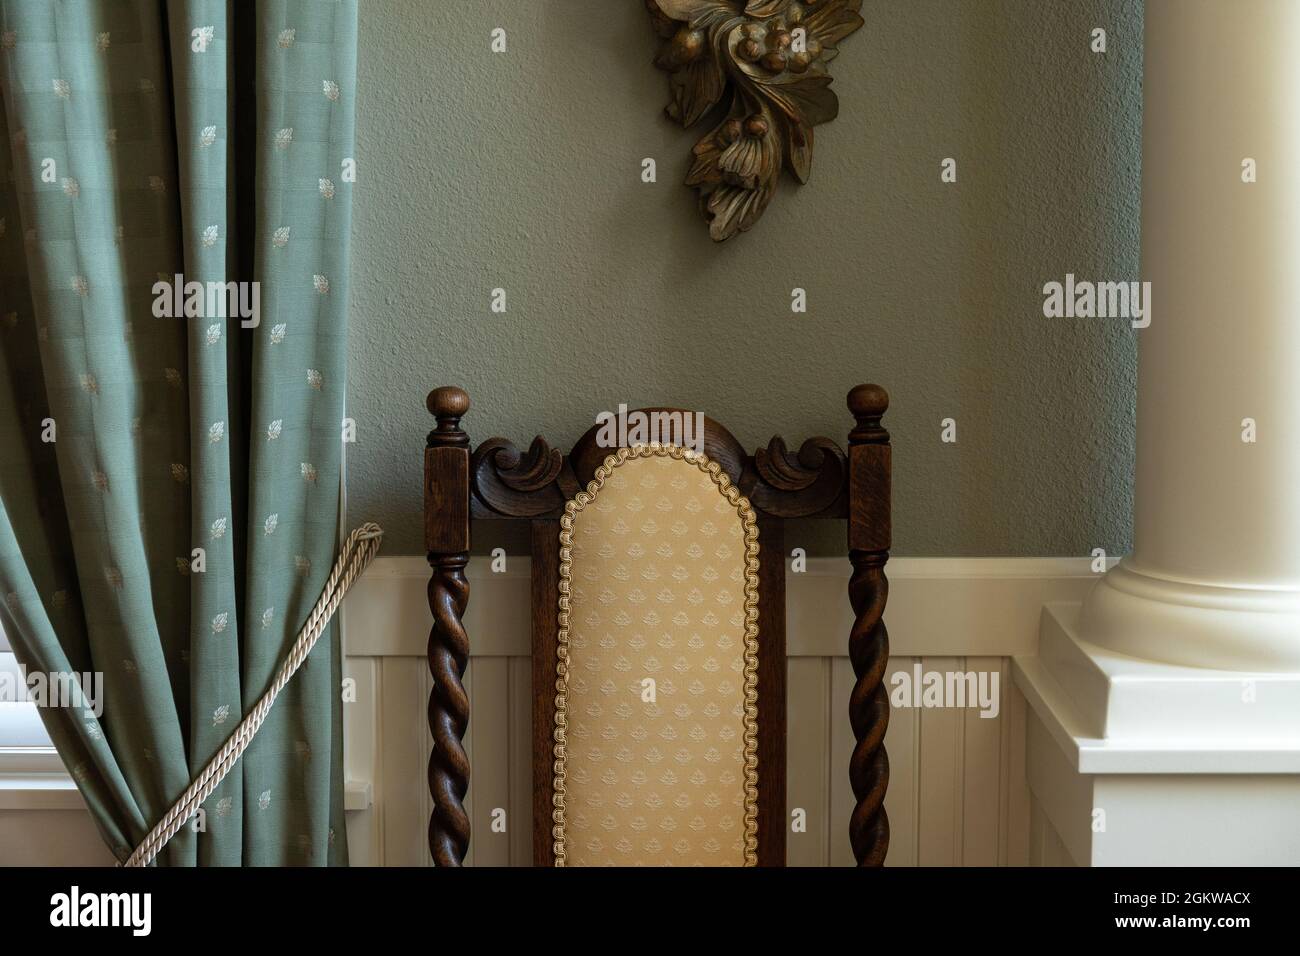 Detail of Interior House Design with Curtain and Antique Wooden Barley Twist Chair Stock Photo